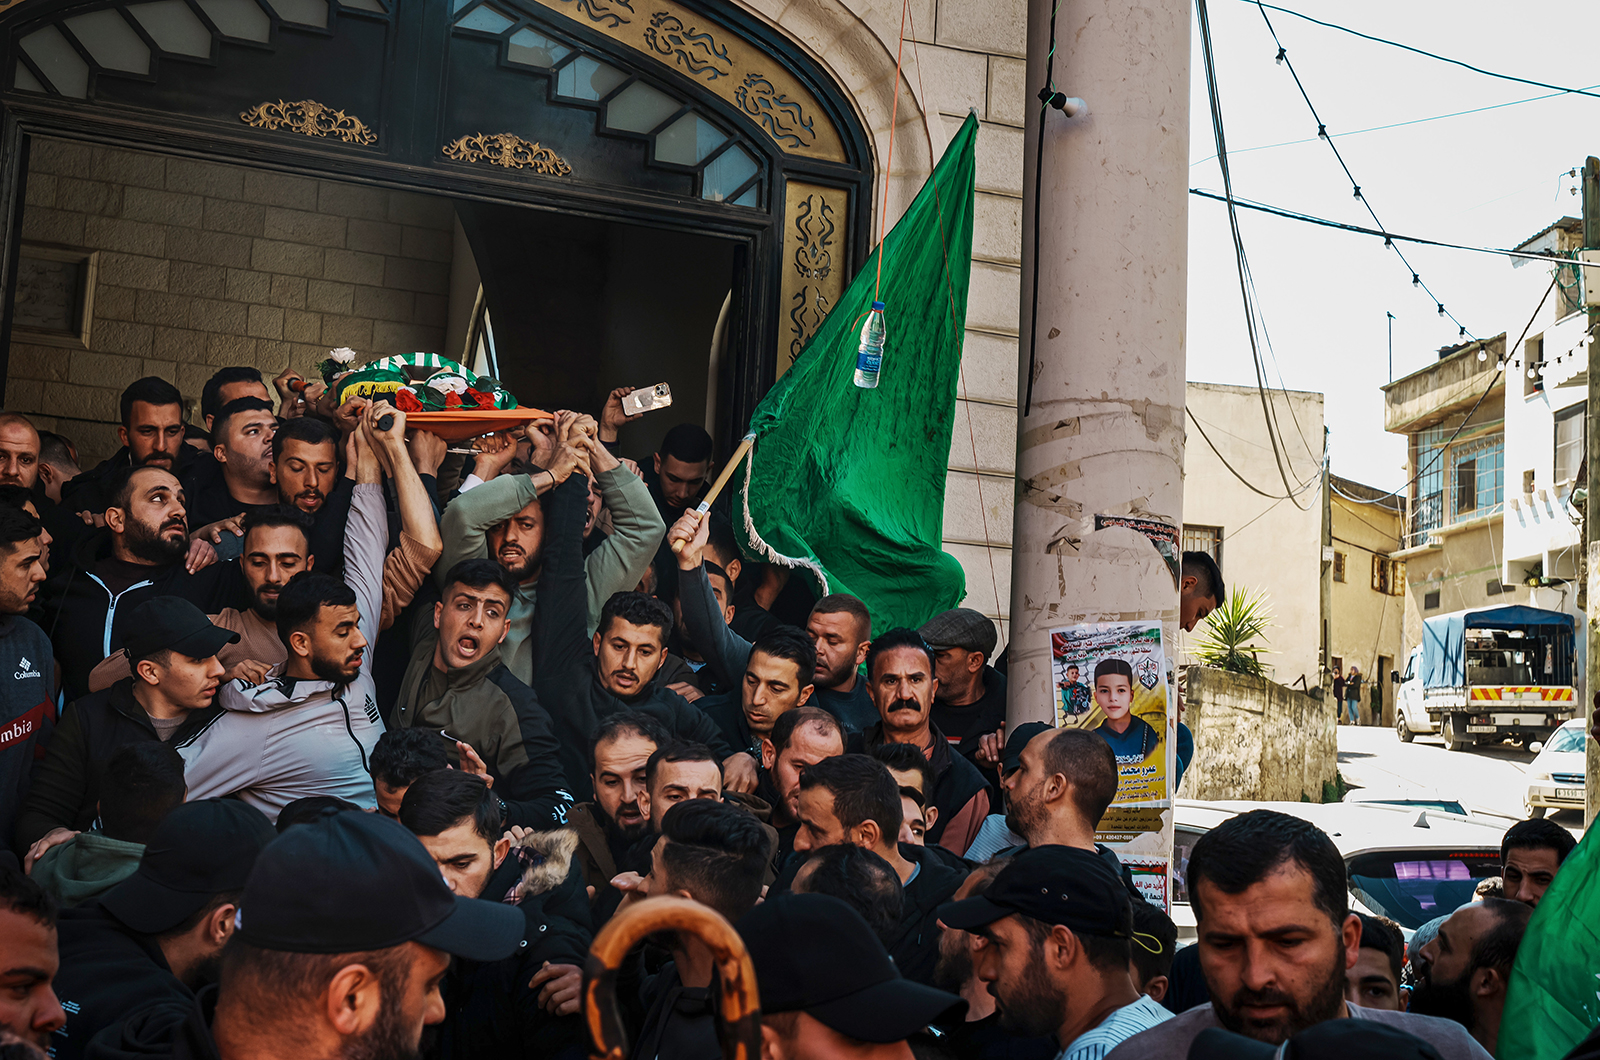 Community members and relatives carry the body of 10-year-old Amro Najjar, who was killed by Israeli forces, during a funeral procession at a mosque in Burin in the occupied West Bank on March 5.